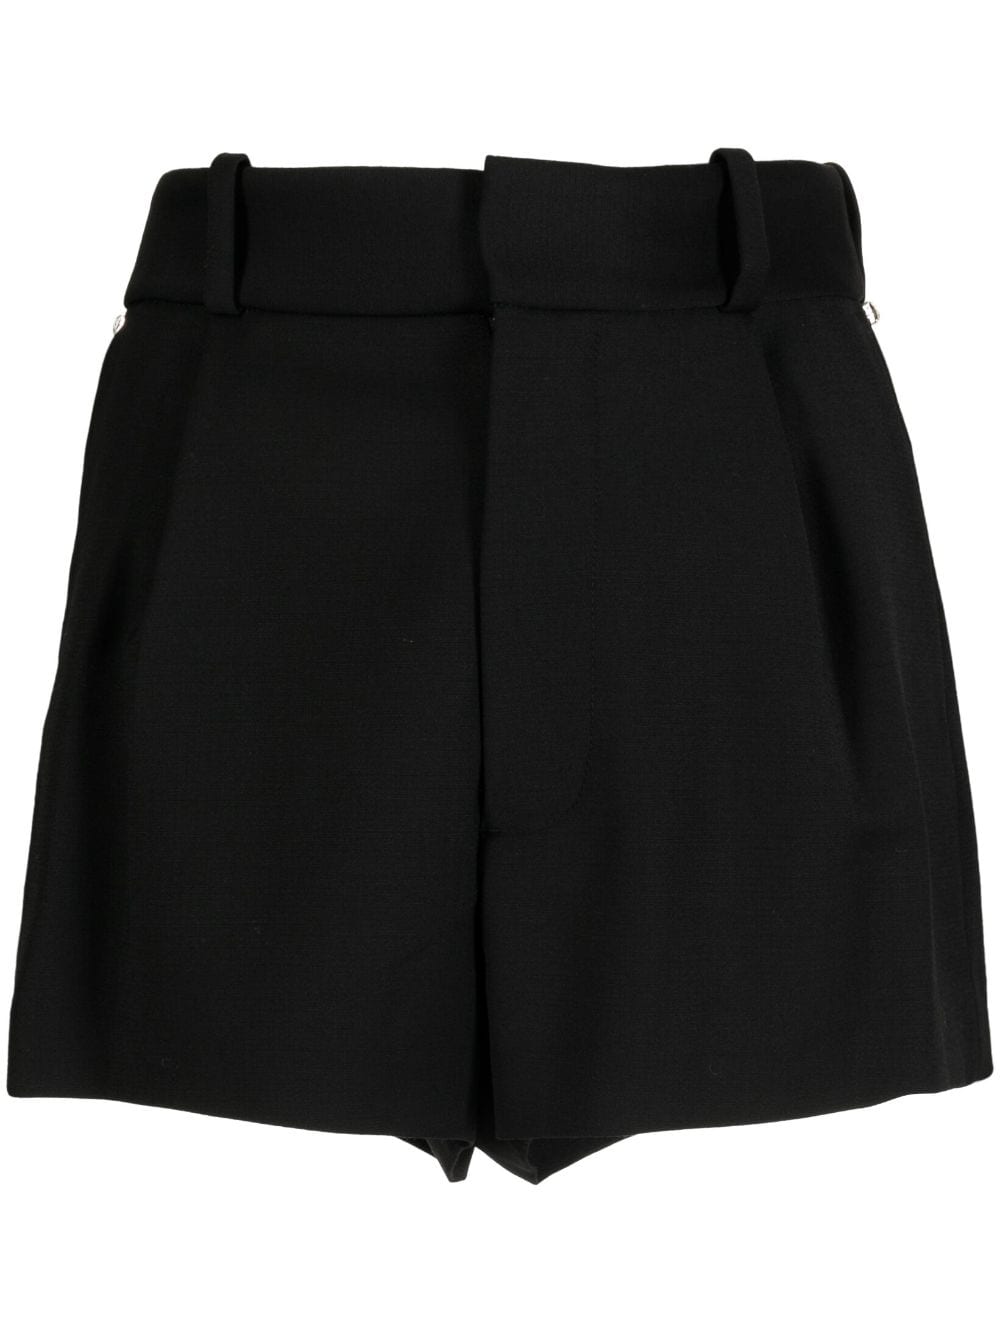 AREA crystal-embellished cut-out shorts - Black von AREA